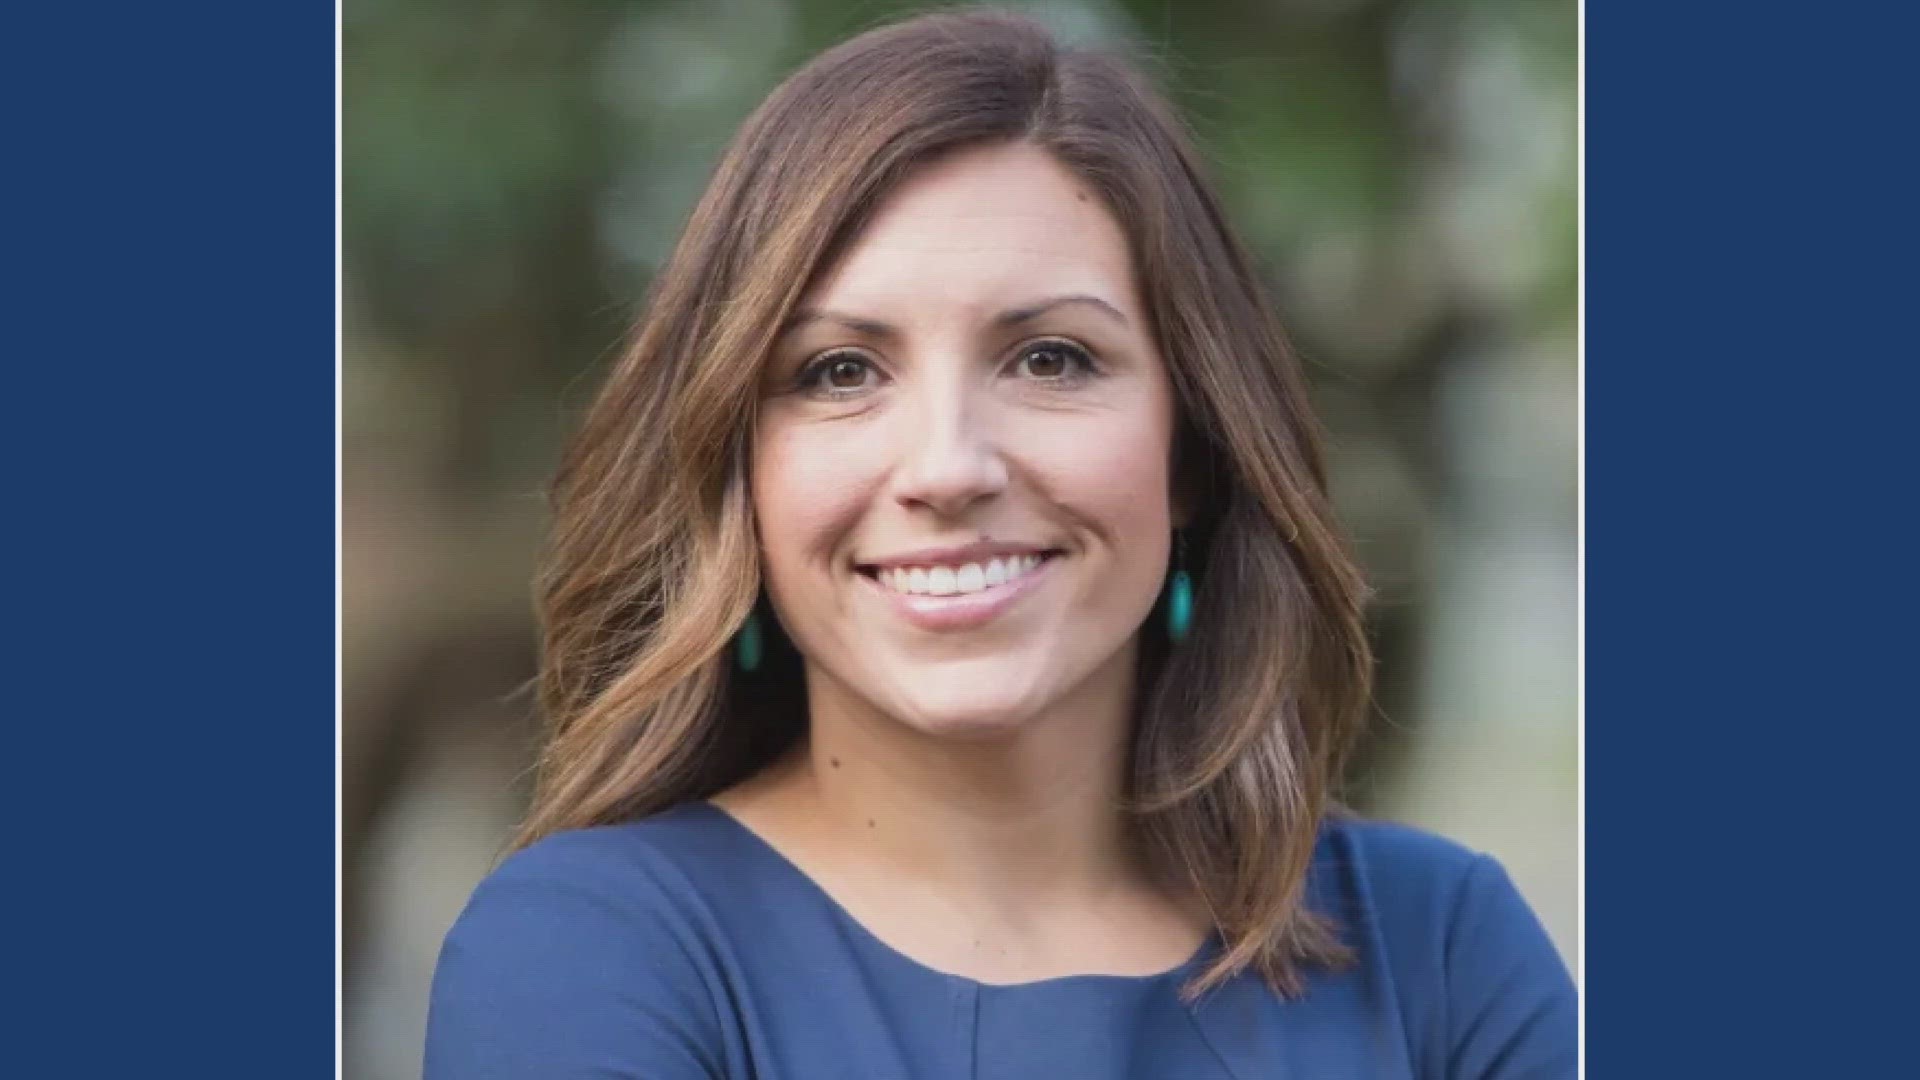 Teresa Mosqueda and Jorge Baron will become the first Latinos elected to the King County Council when they are sworn in on Tuesday